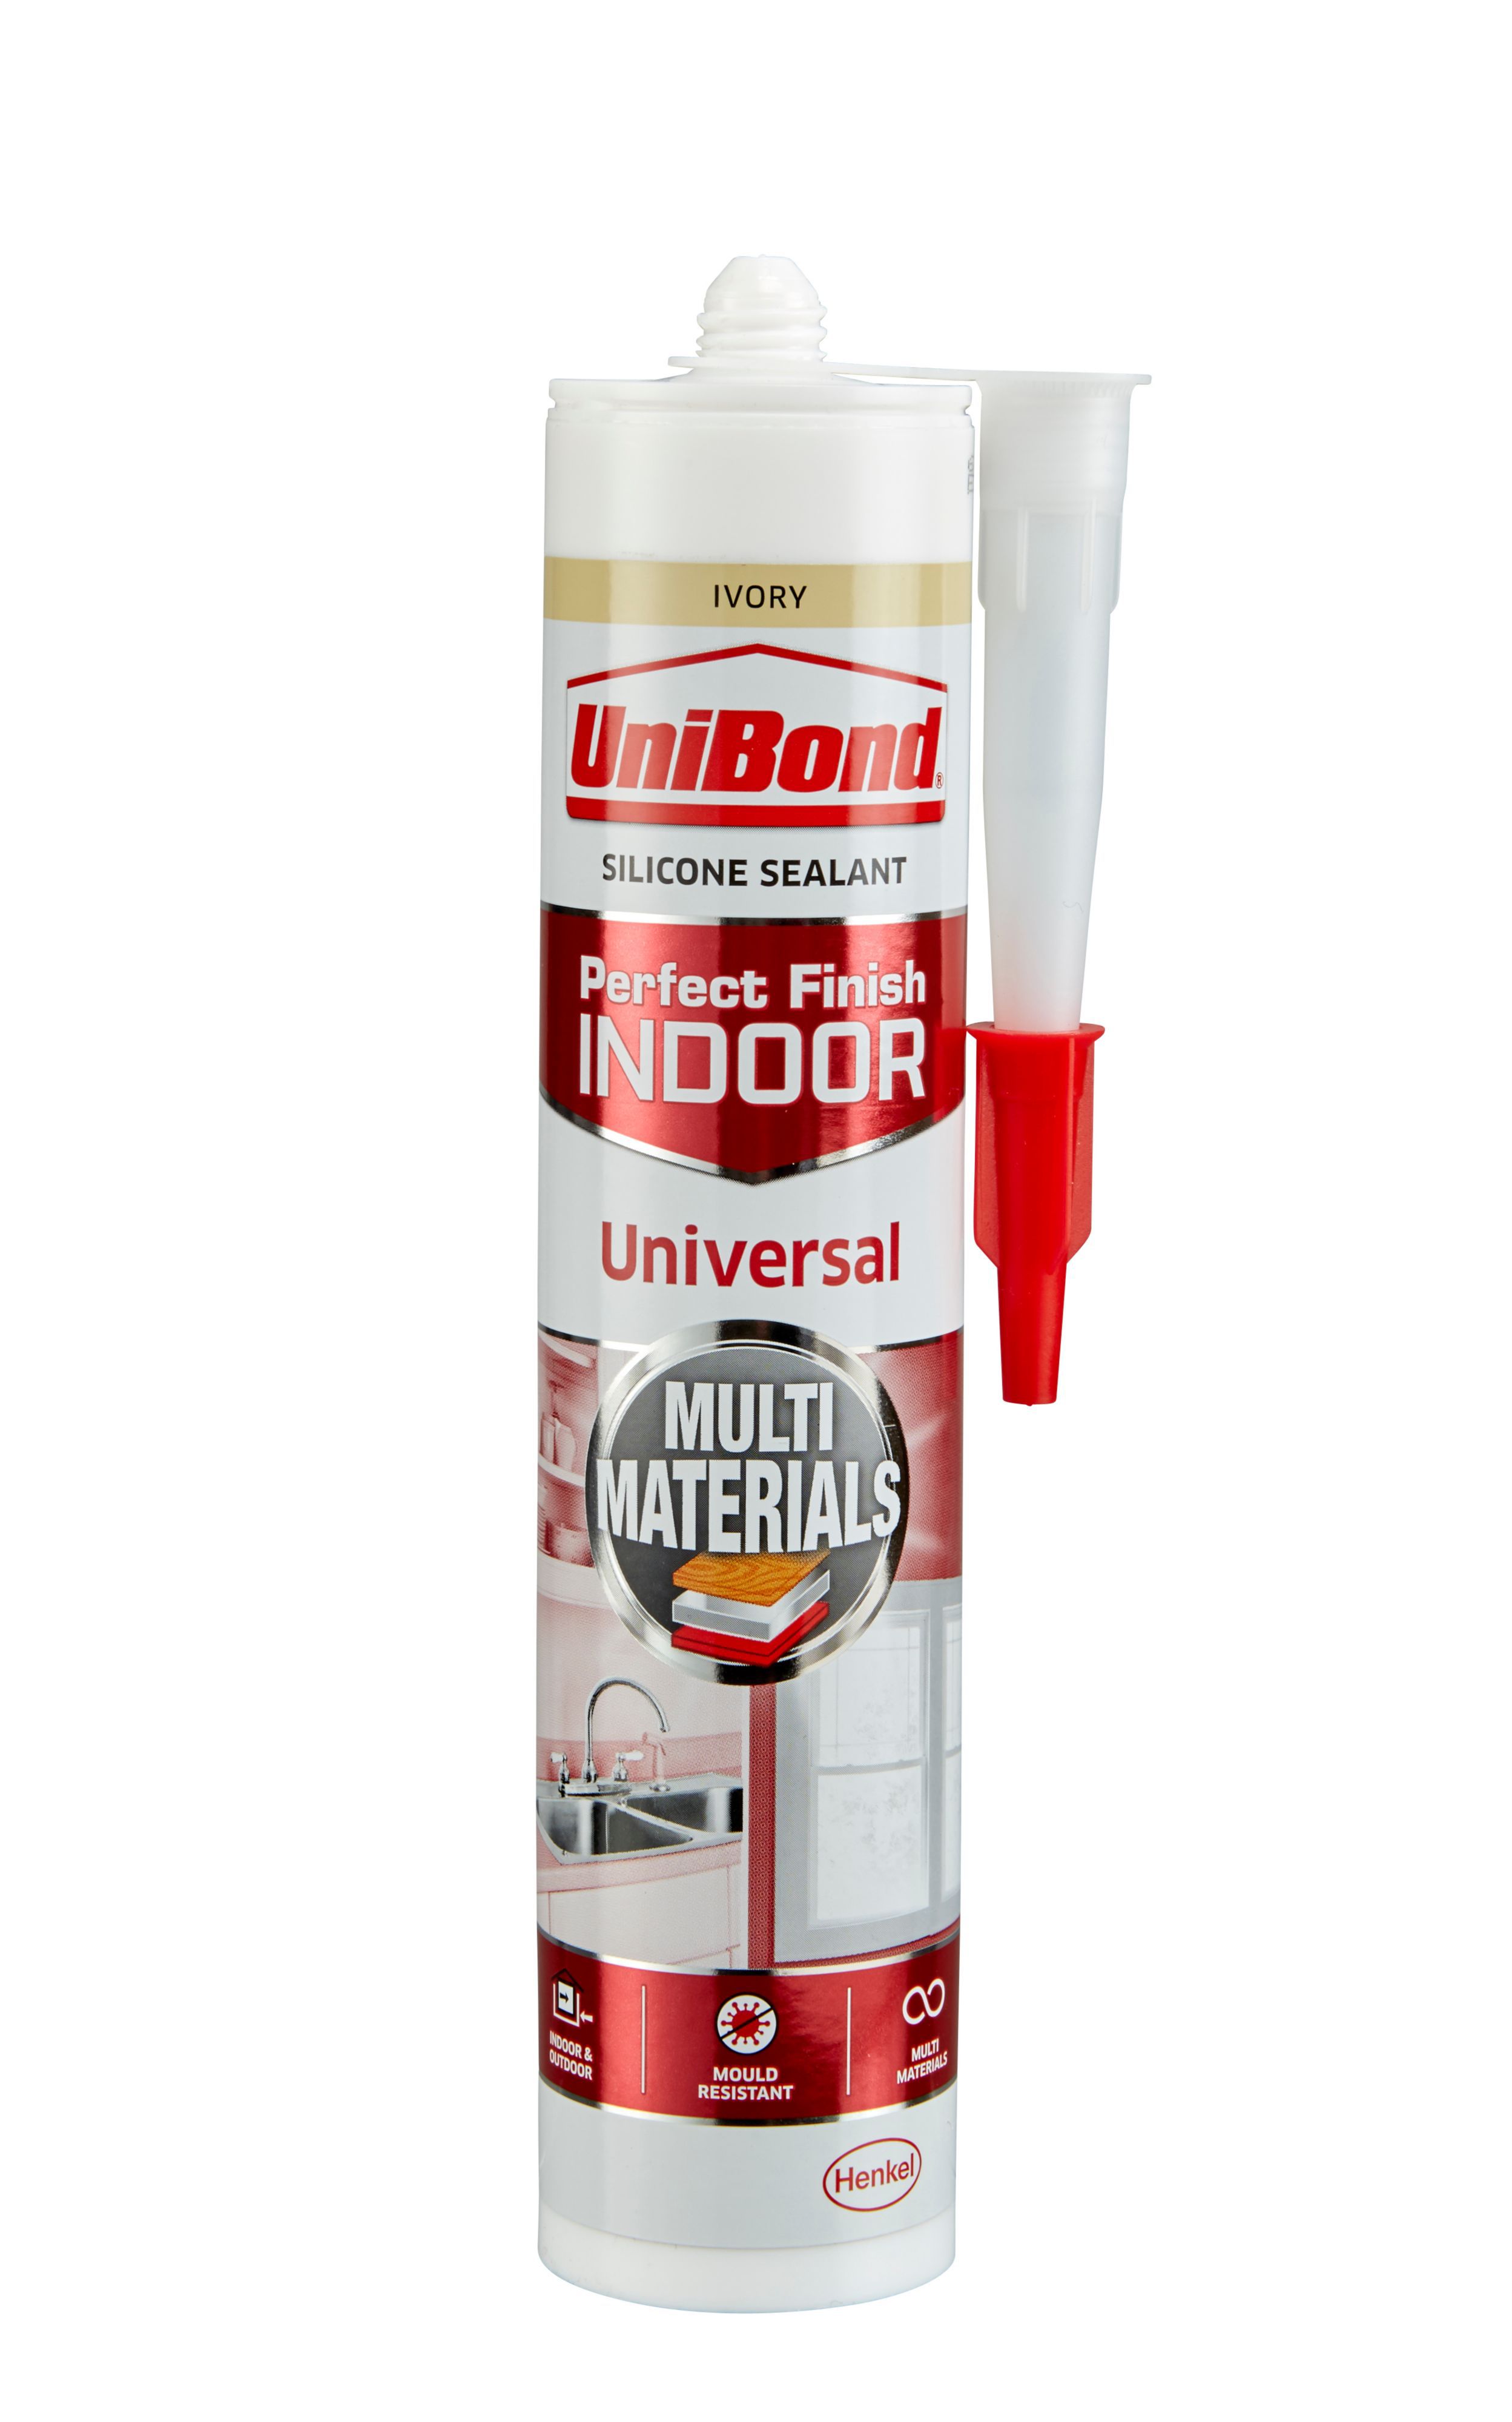 Unibond Ready To Use Perfect Finish Indoor Universal Ivory Sealant Departments Diy At B Q